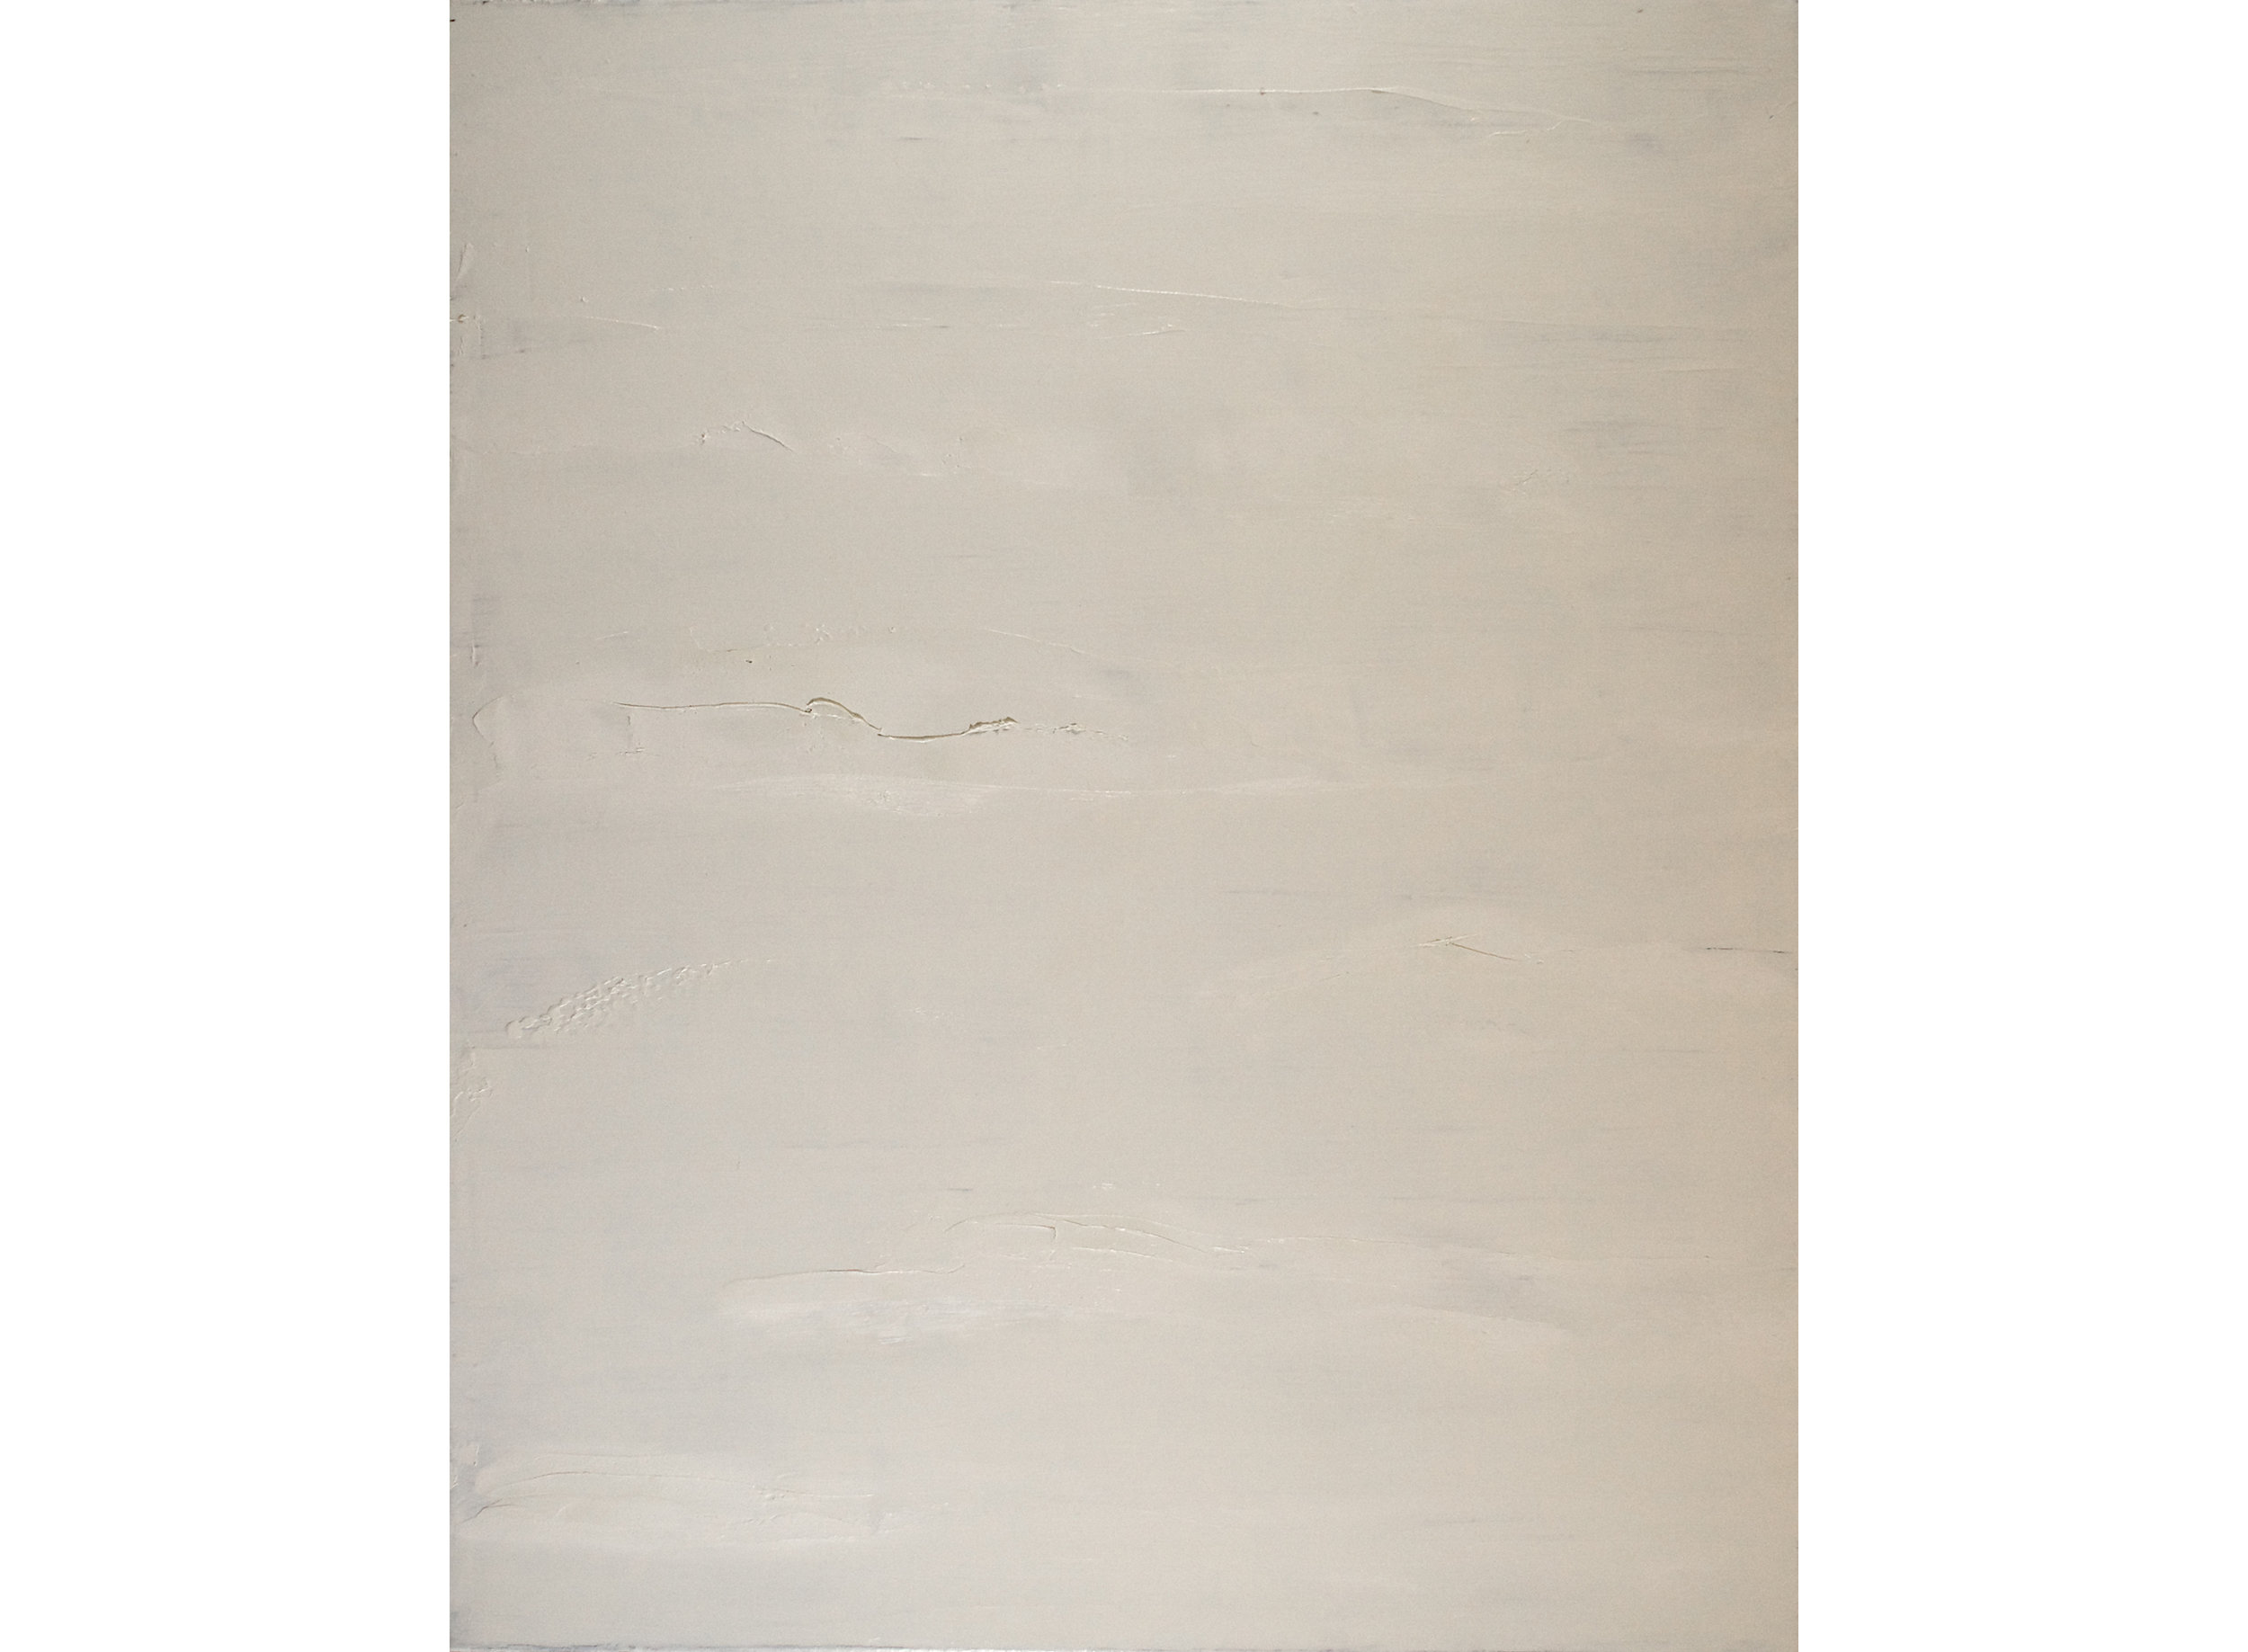 Knifed White, 2015, Oil on Linen, 34x28 inches